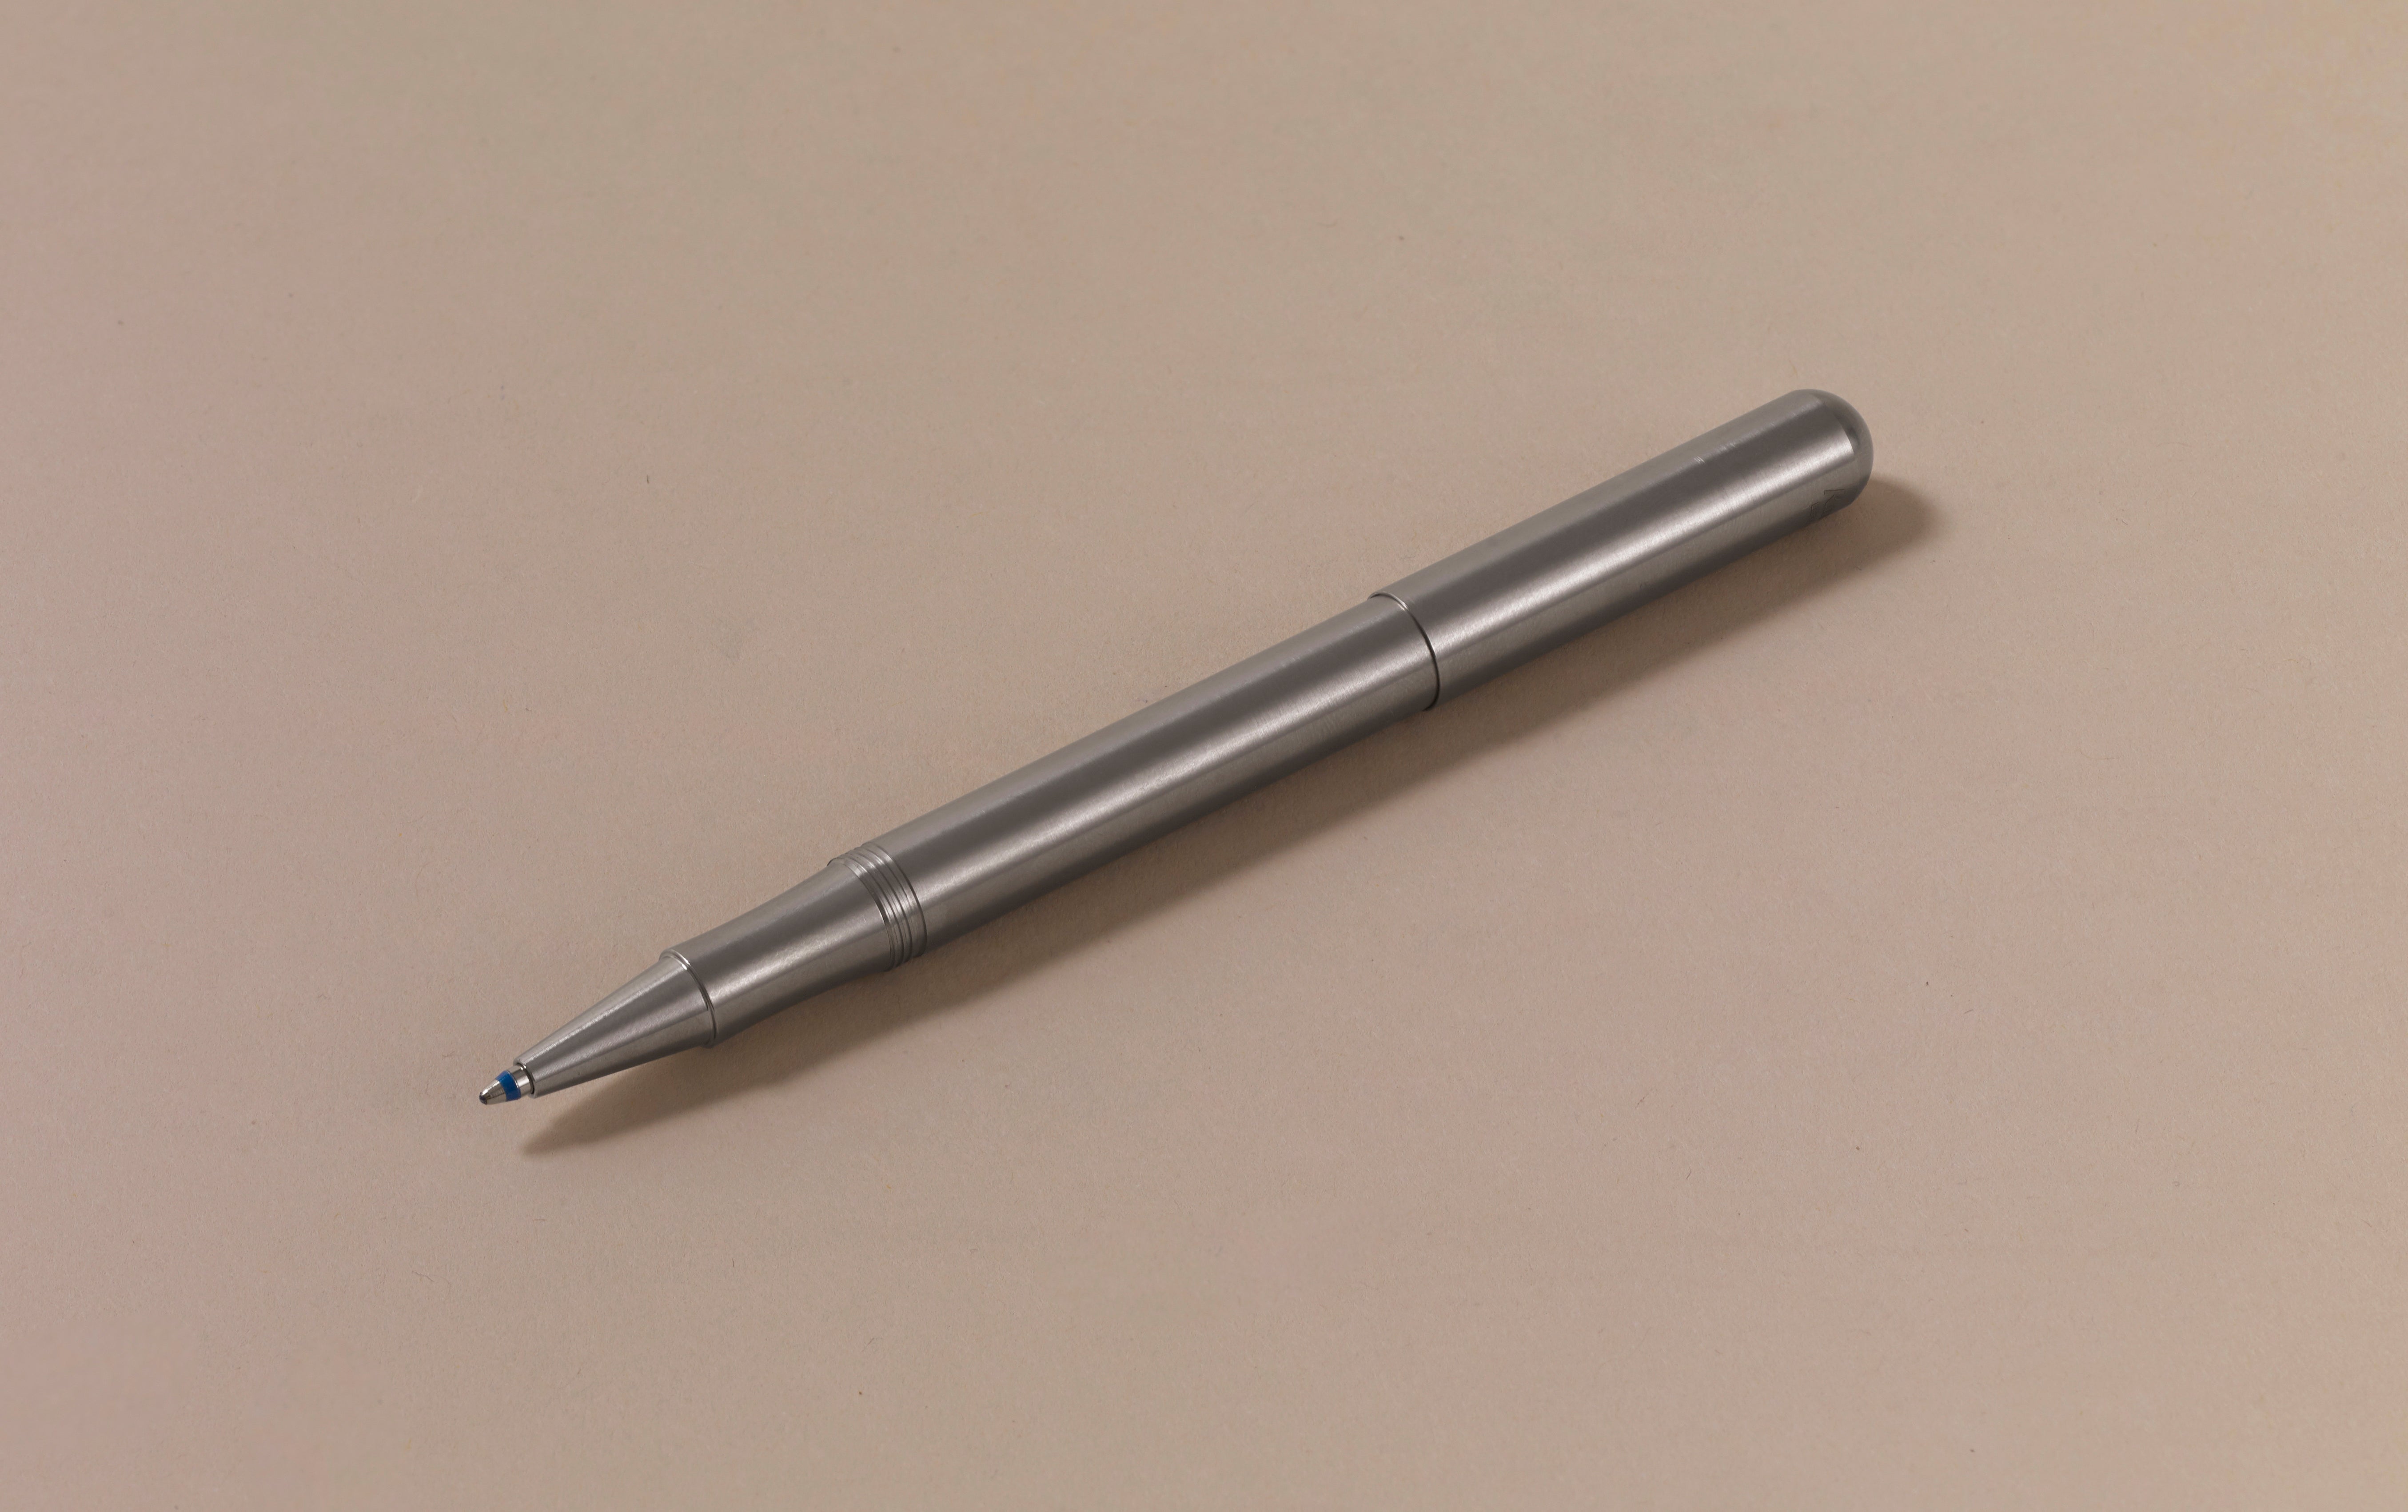 Capped Stainless Steel Kaweco Liliput Ballpoint Pen